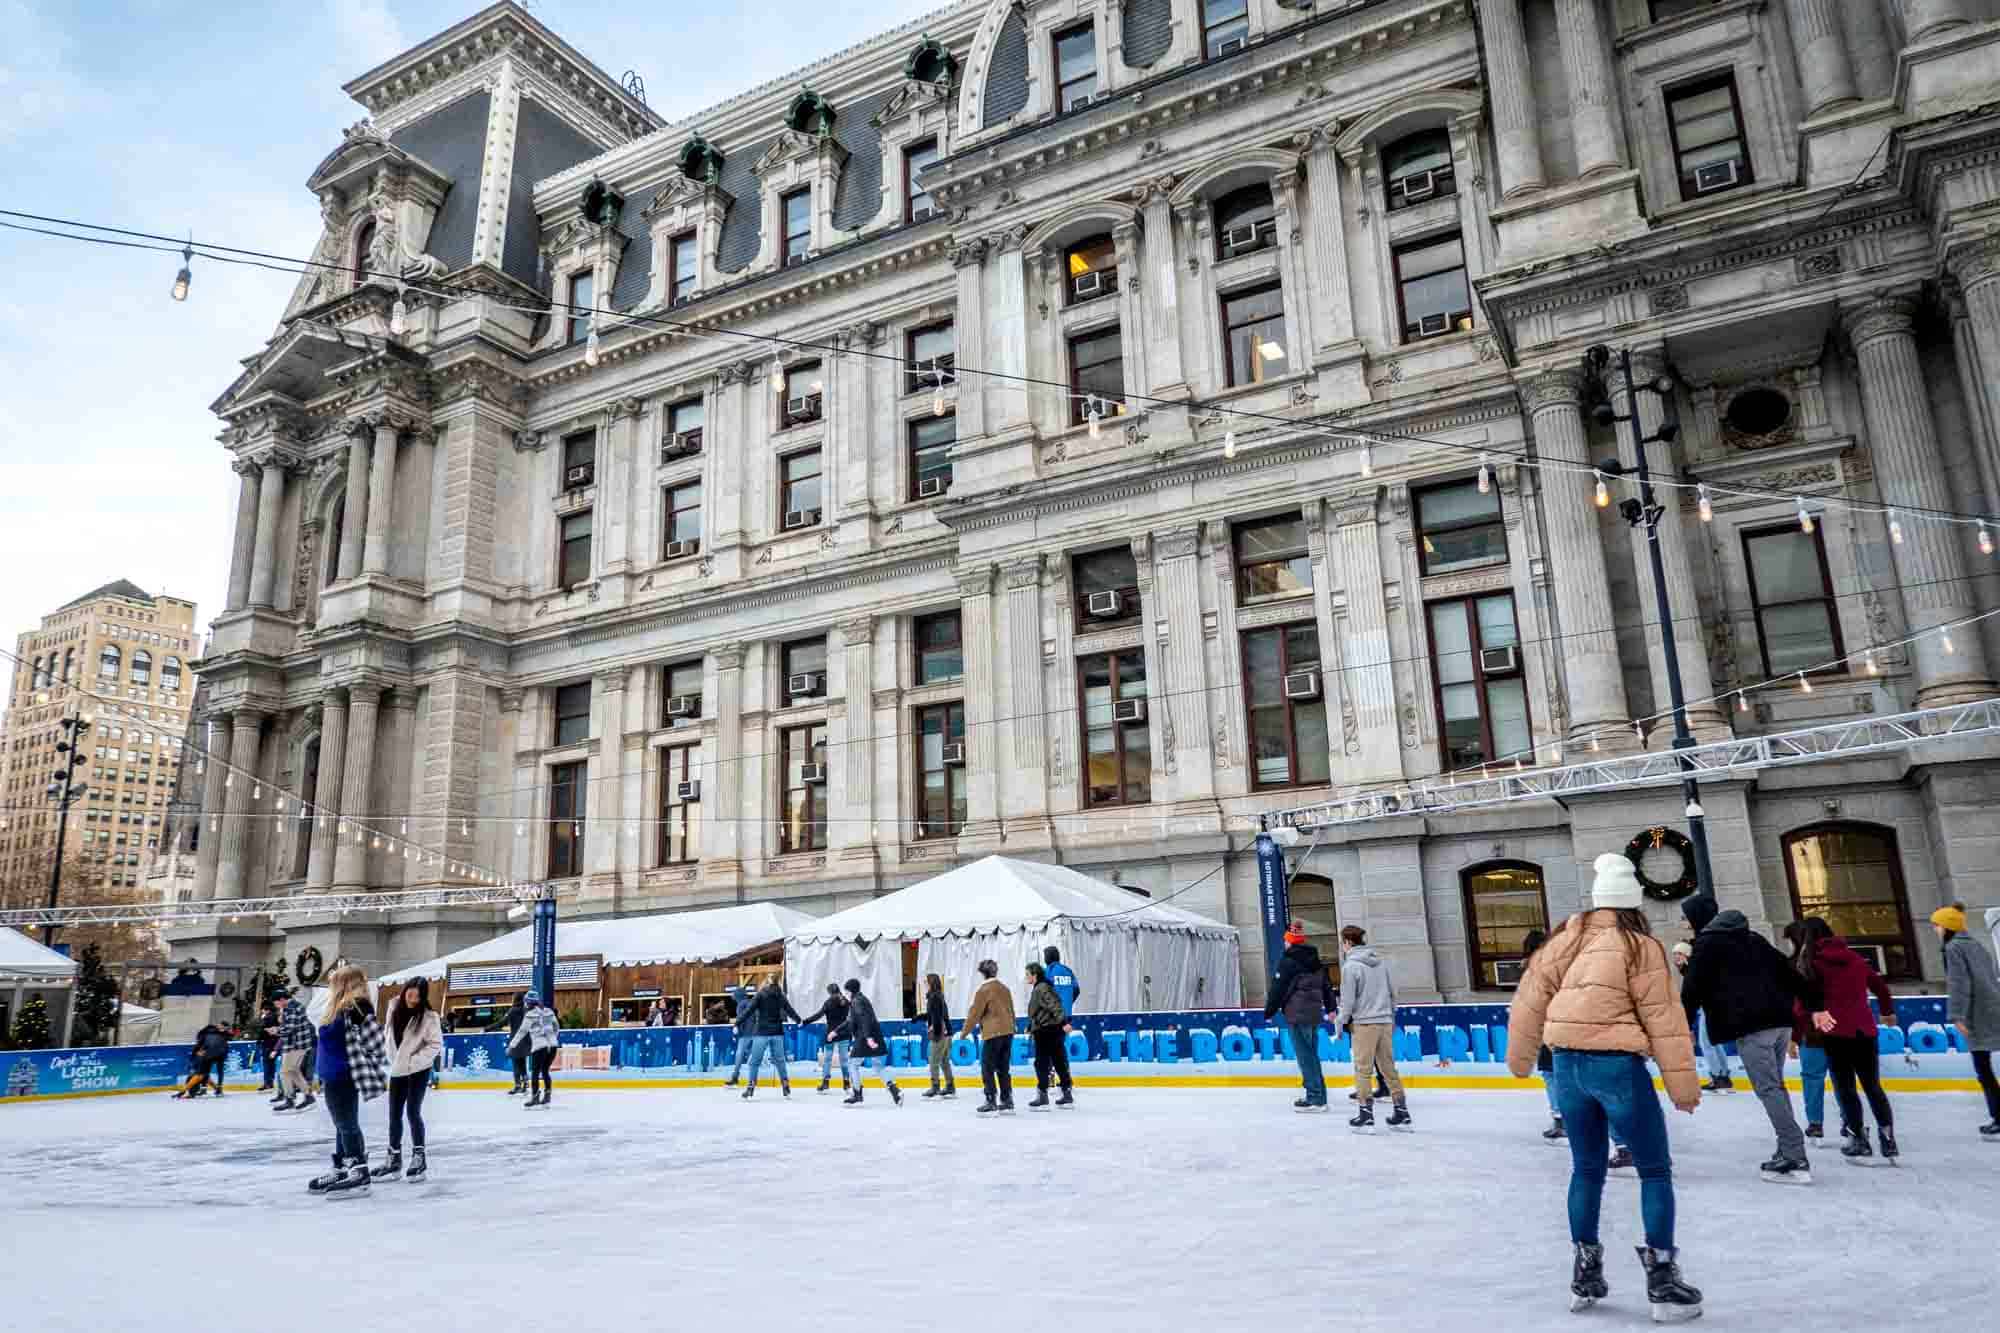 People skating on an ice-skating rink beside a large gray building